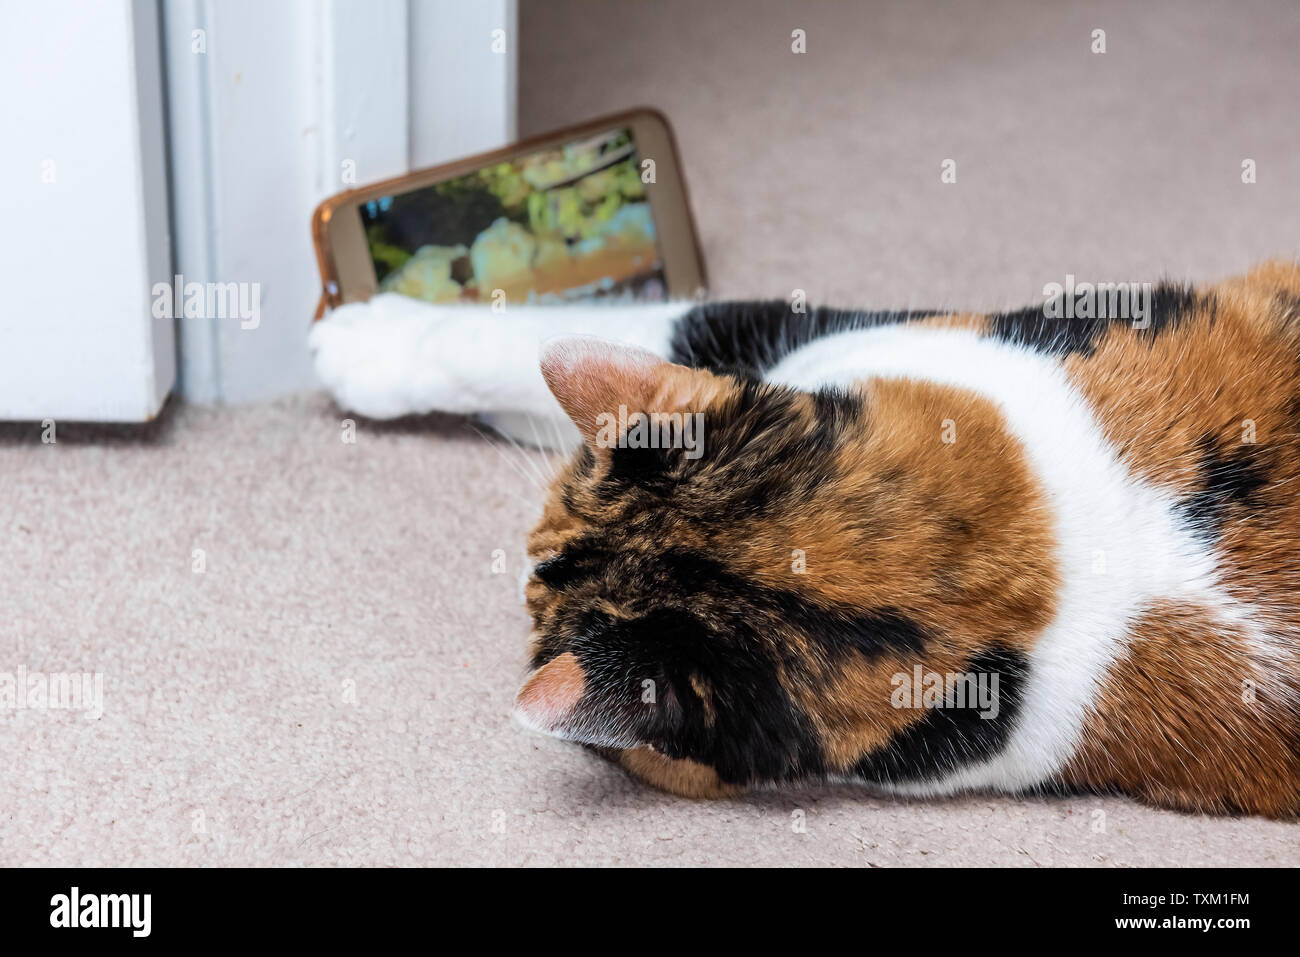 Calico cat looking at smartphone mobile cell phone video of birds and  animals on floor inside house touching screen with paws Stock Photo - Alamy